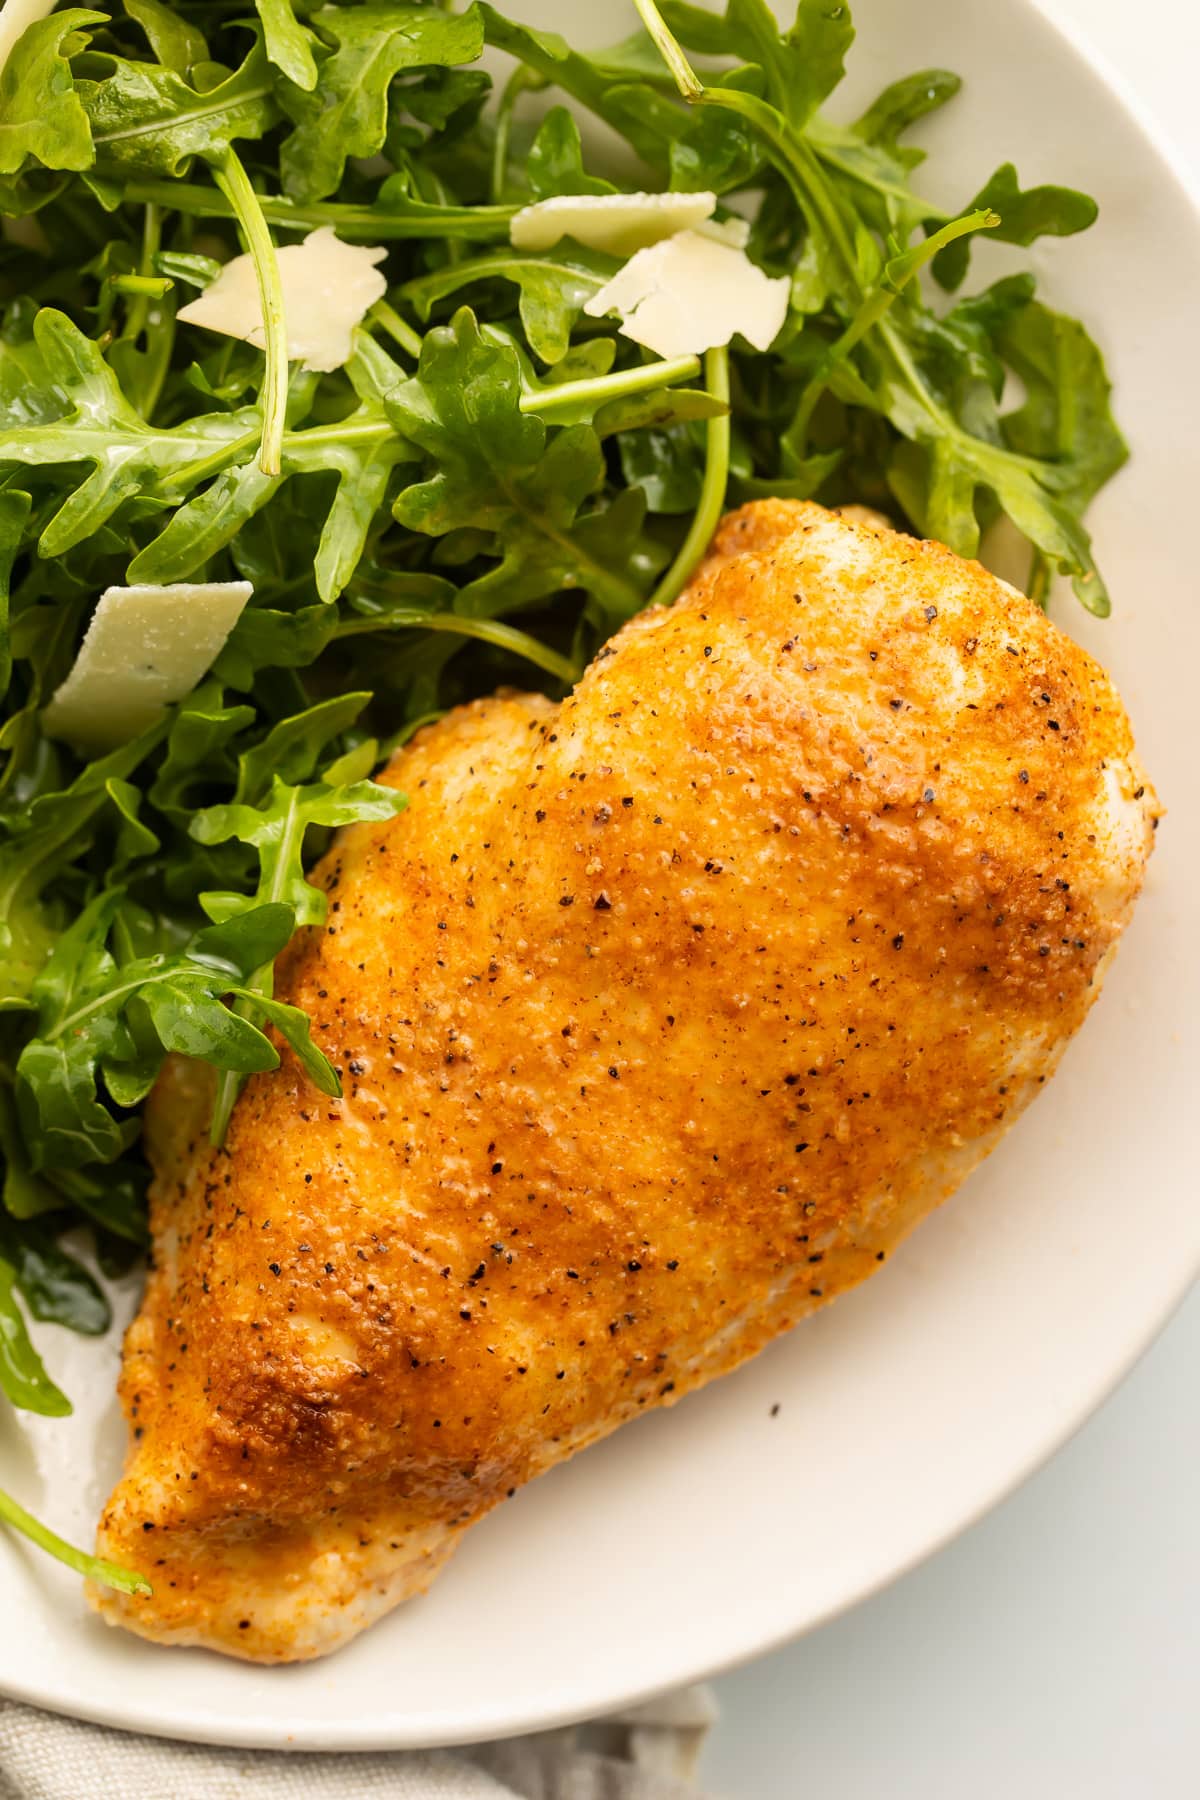 A whole Instant Pot chicken breast, fully cooked and resting on a plate with a small salad.